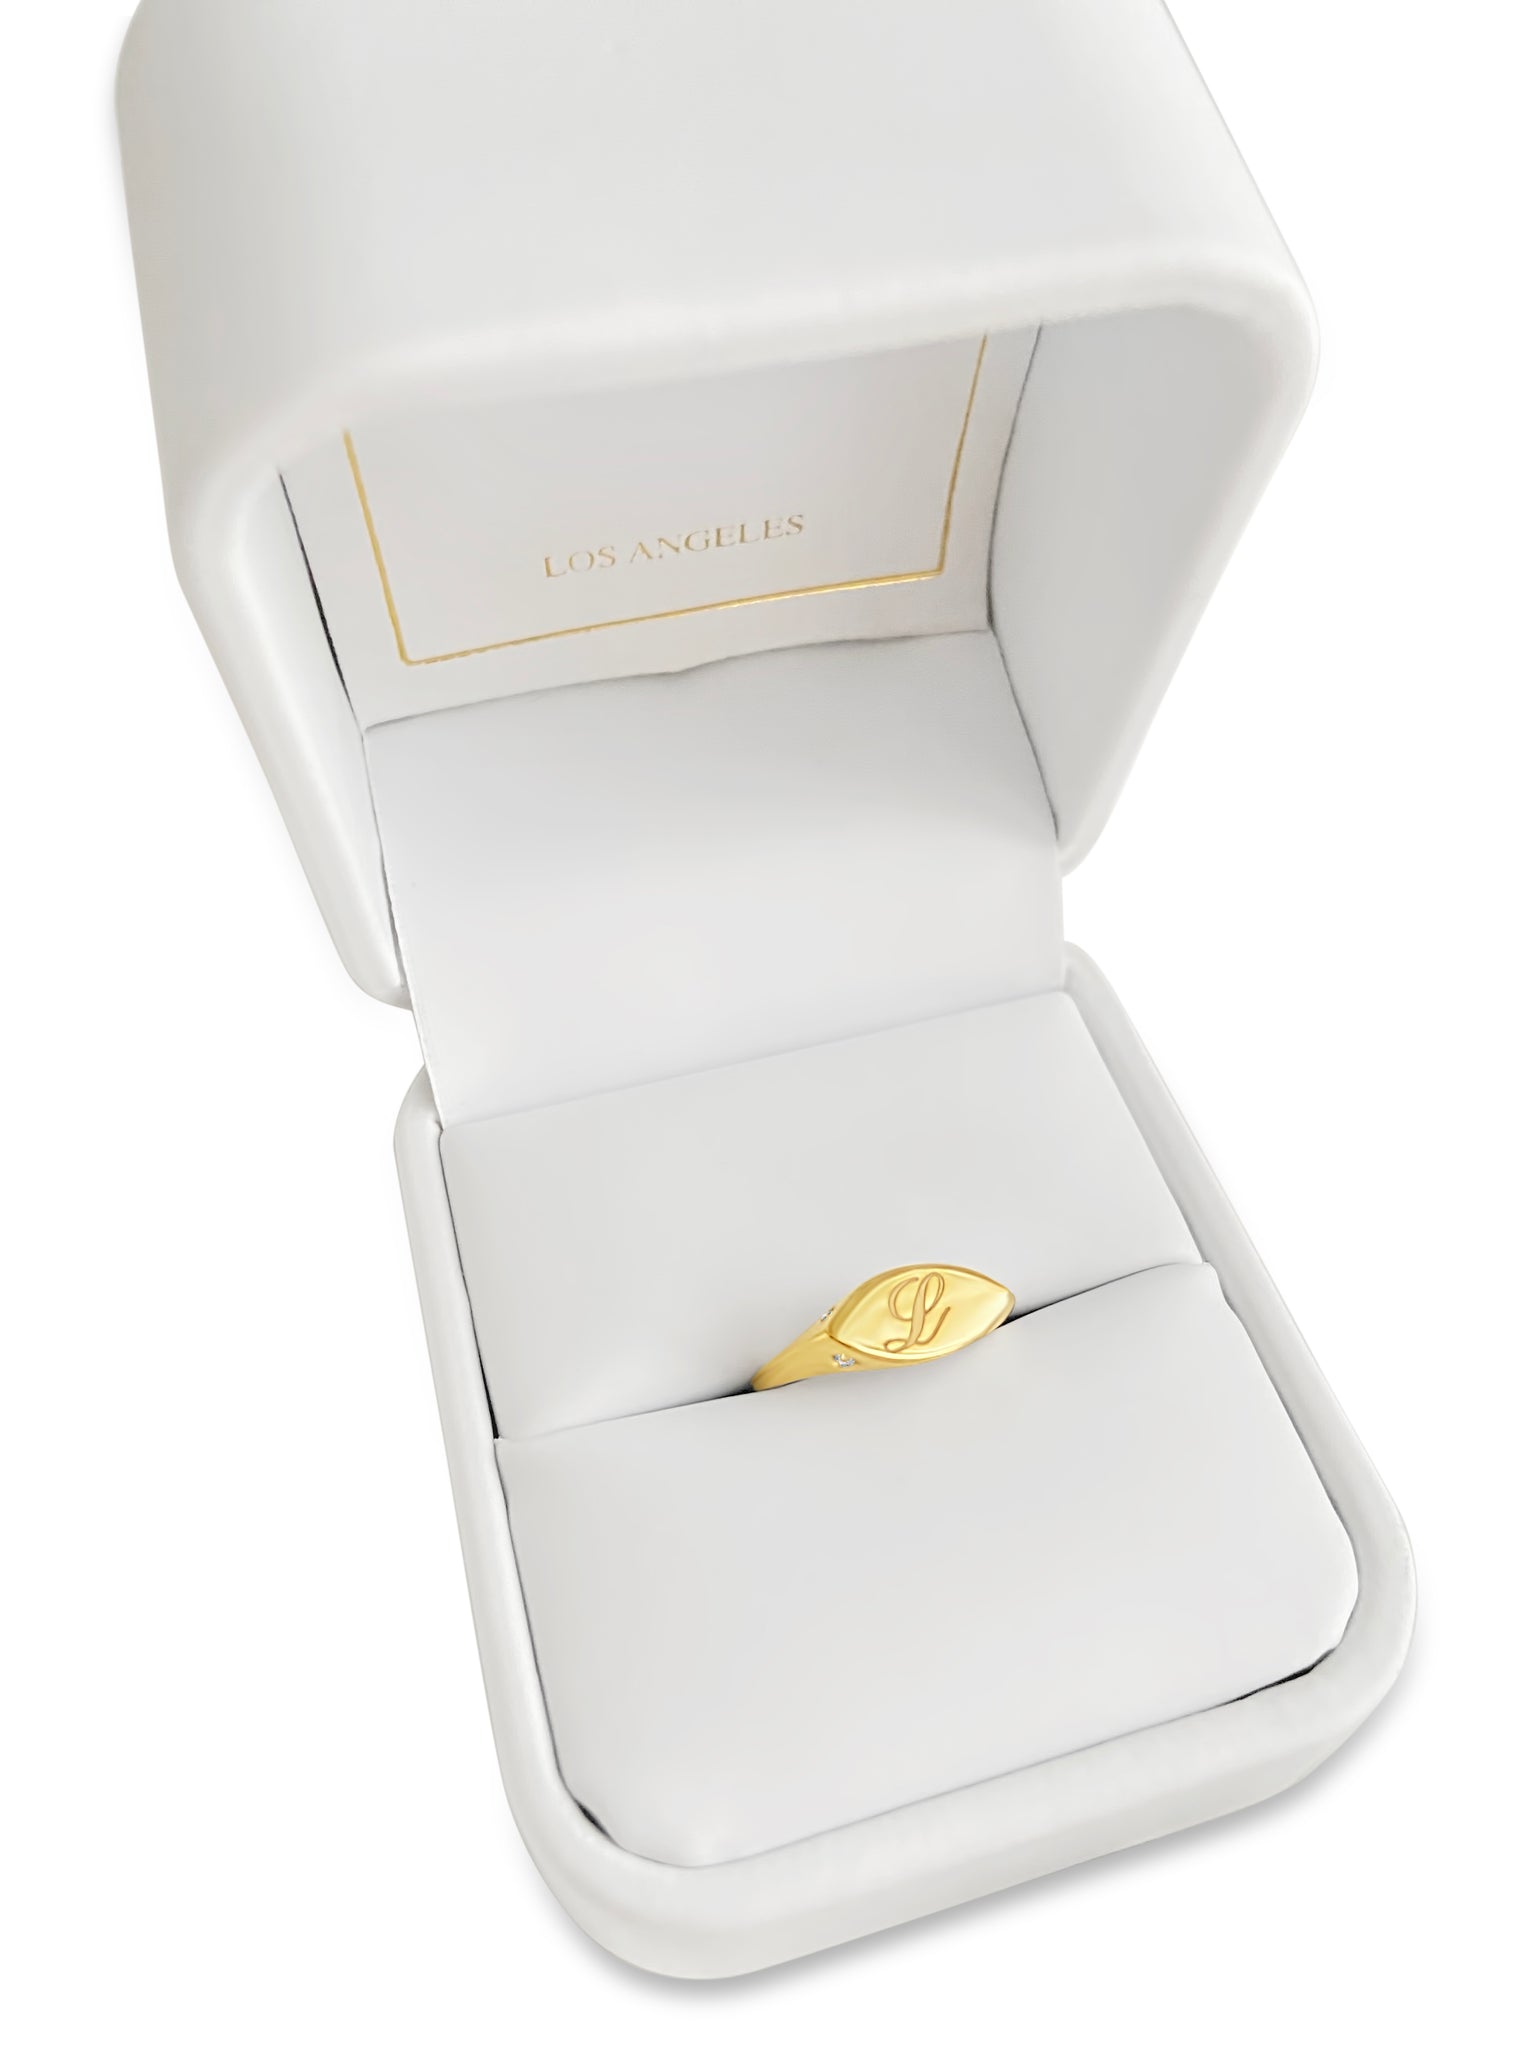 Jacqueline Diamond Signet Ring in 14K Solid Gold